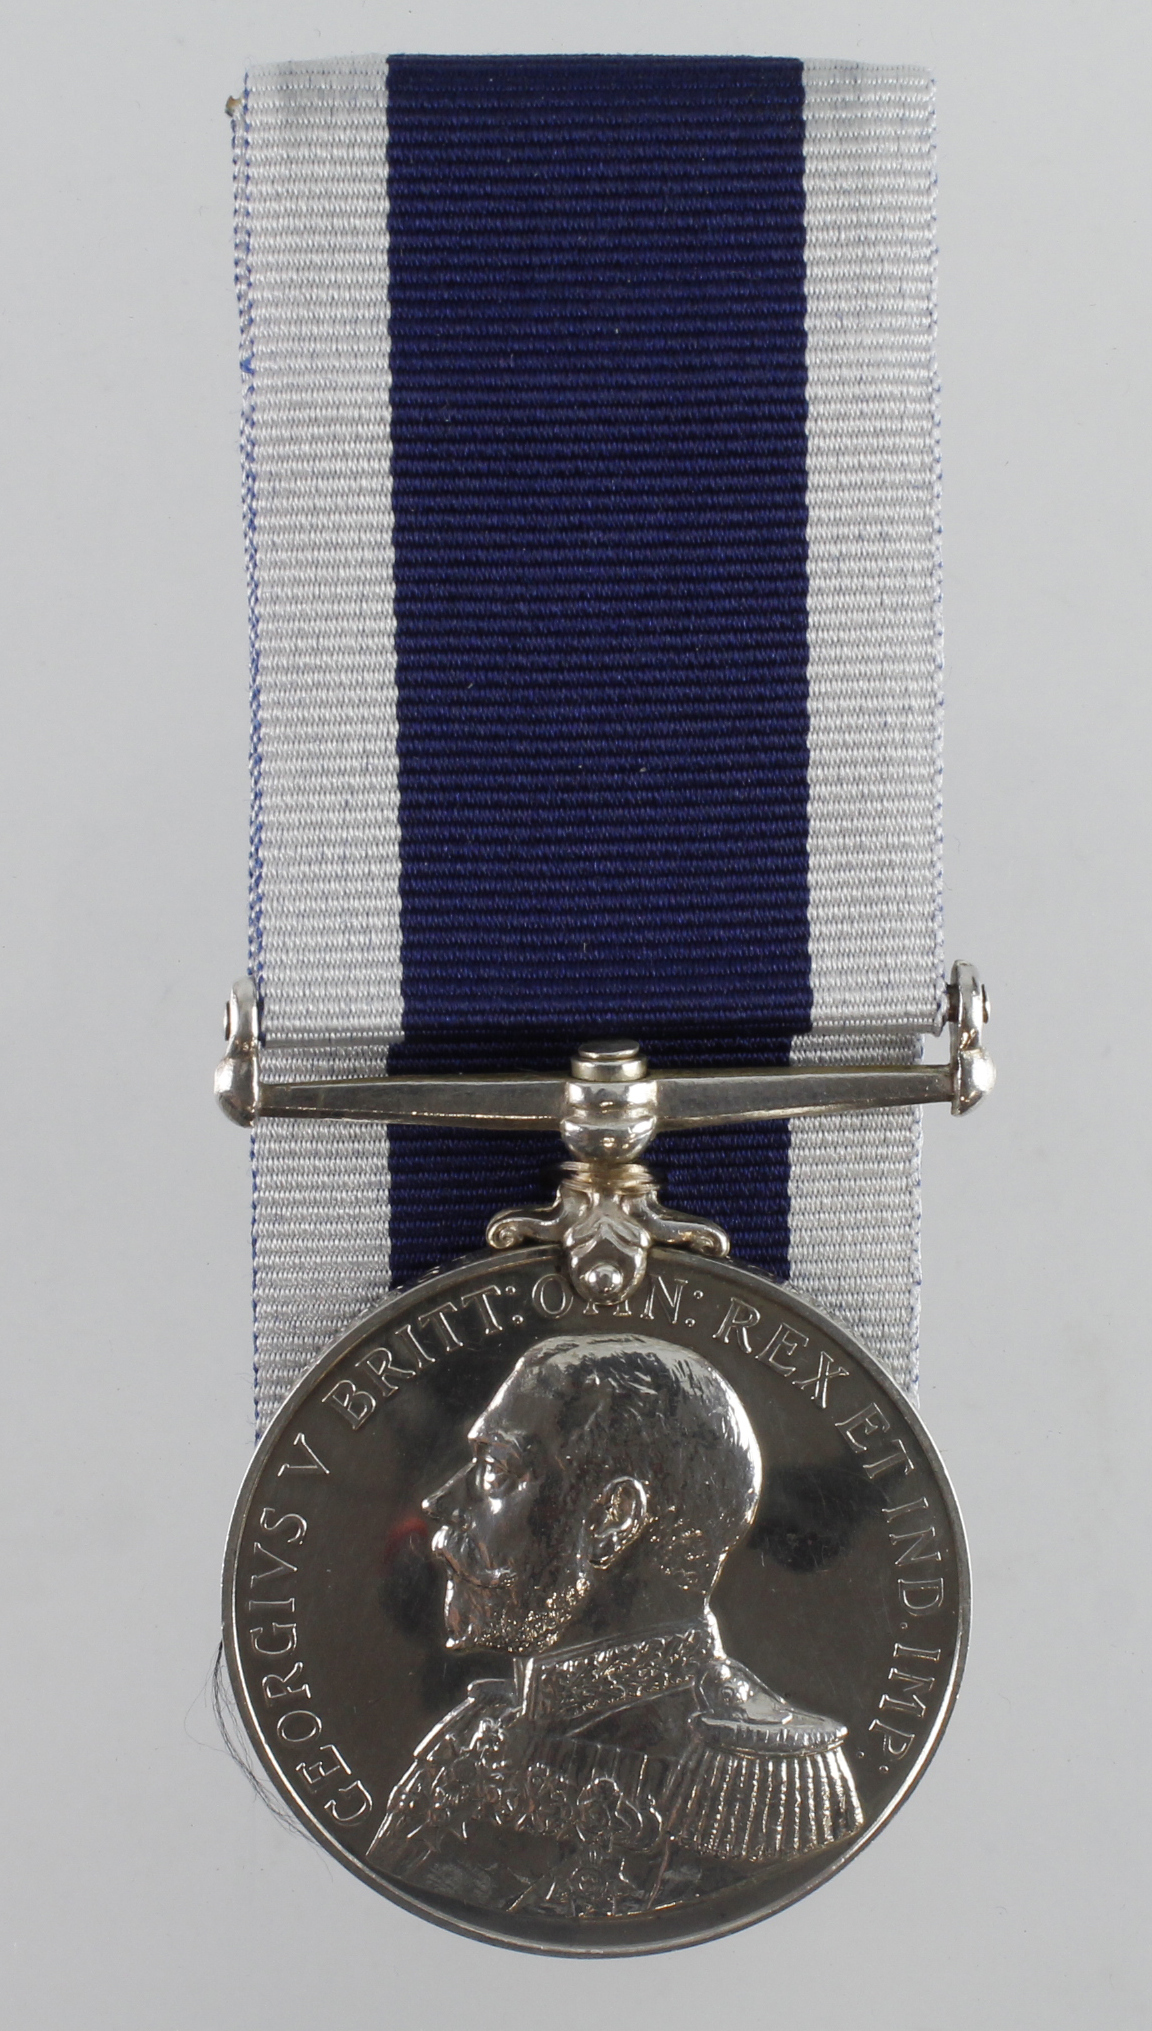 Naval LSGC Medal GV (193563 William Stephens P.O.2CL.(C.G.) HM Coastguard). With research, born St